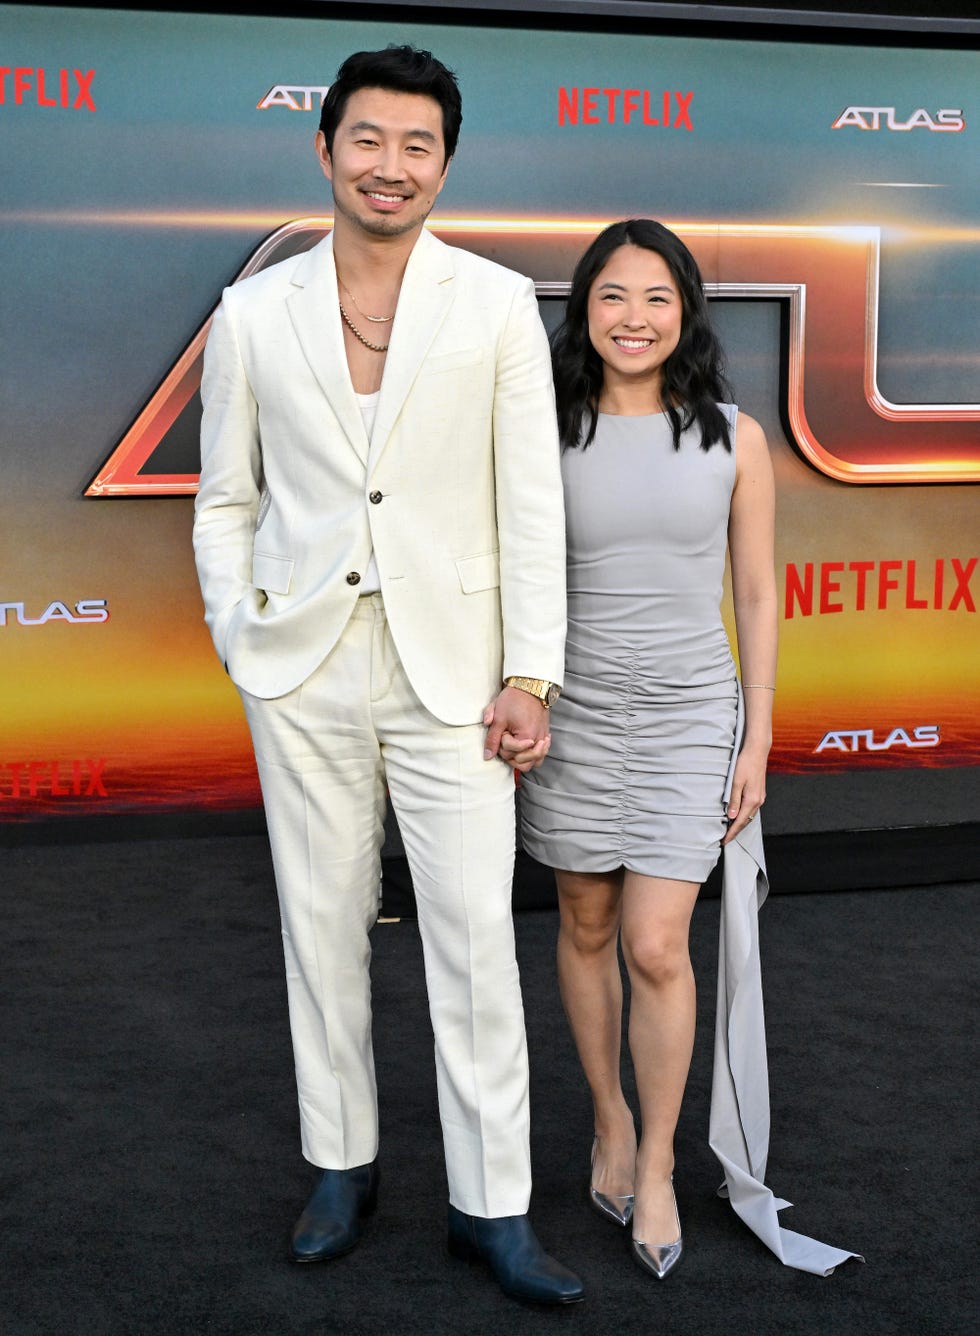 los angeles, california may 20 simu liu and allison hsu attend the premiere for netflix's atlas at the egyptian theatre hollywood on may 20, 2024 in los angeles, california photo by axellebauer griffinfilmmagic